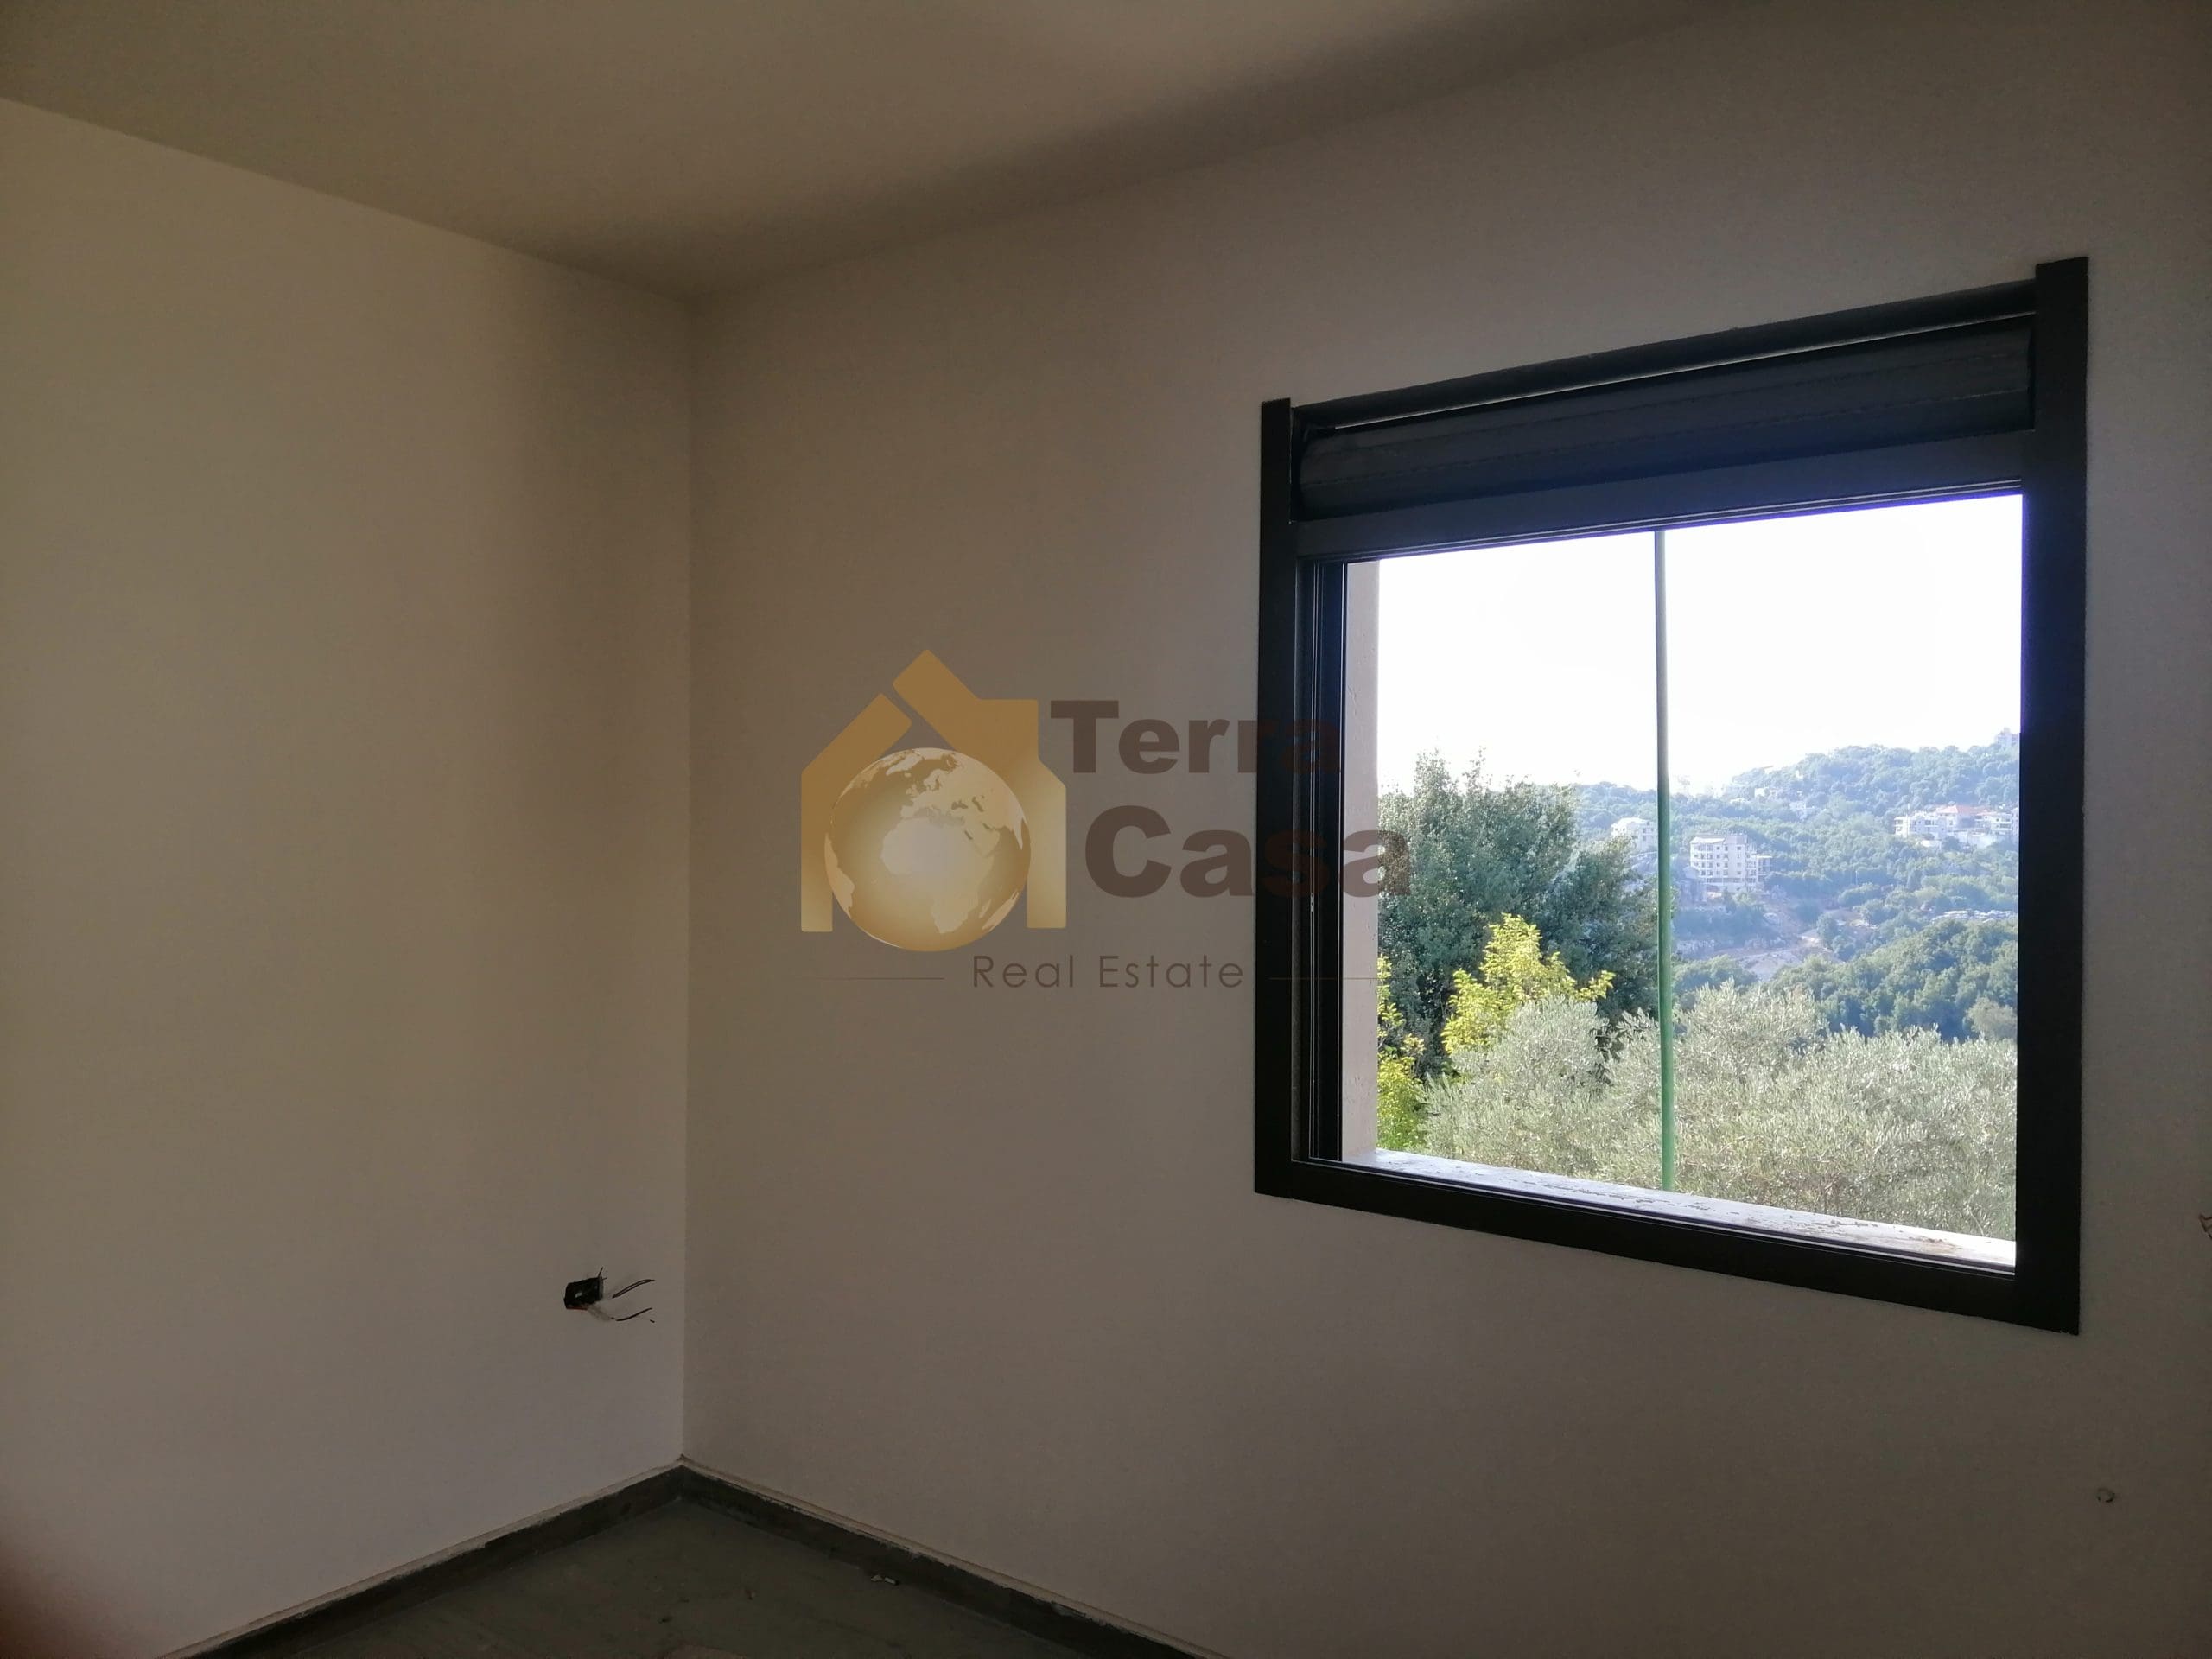 New apartment in Achkout consisting of 170sqm located in nice area offered for 220000$